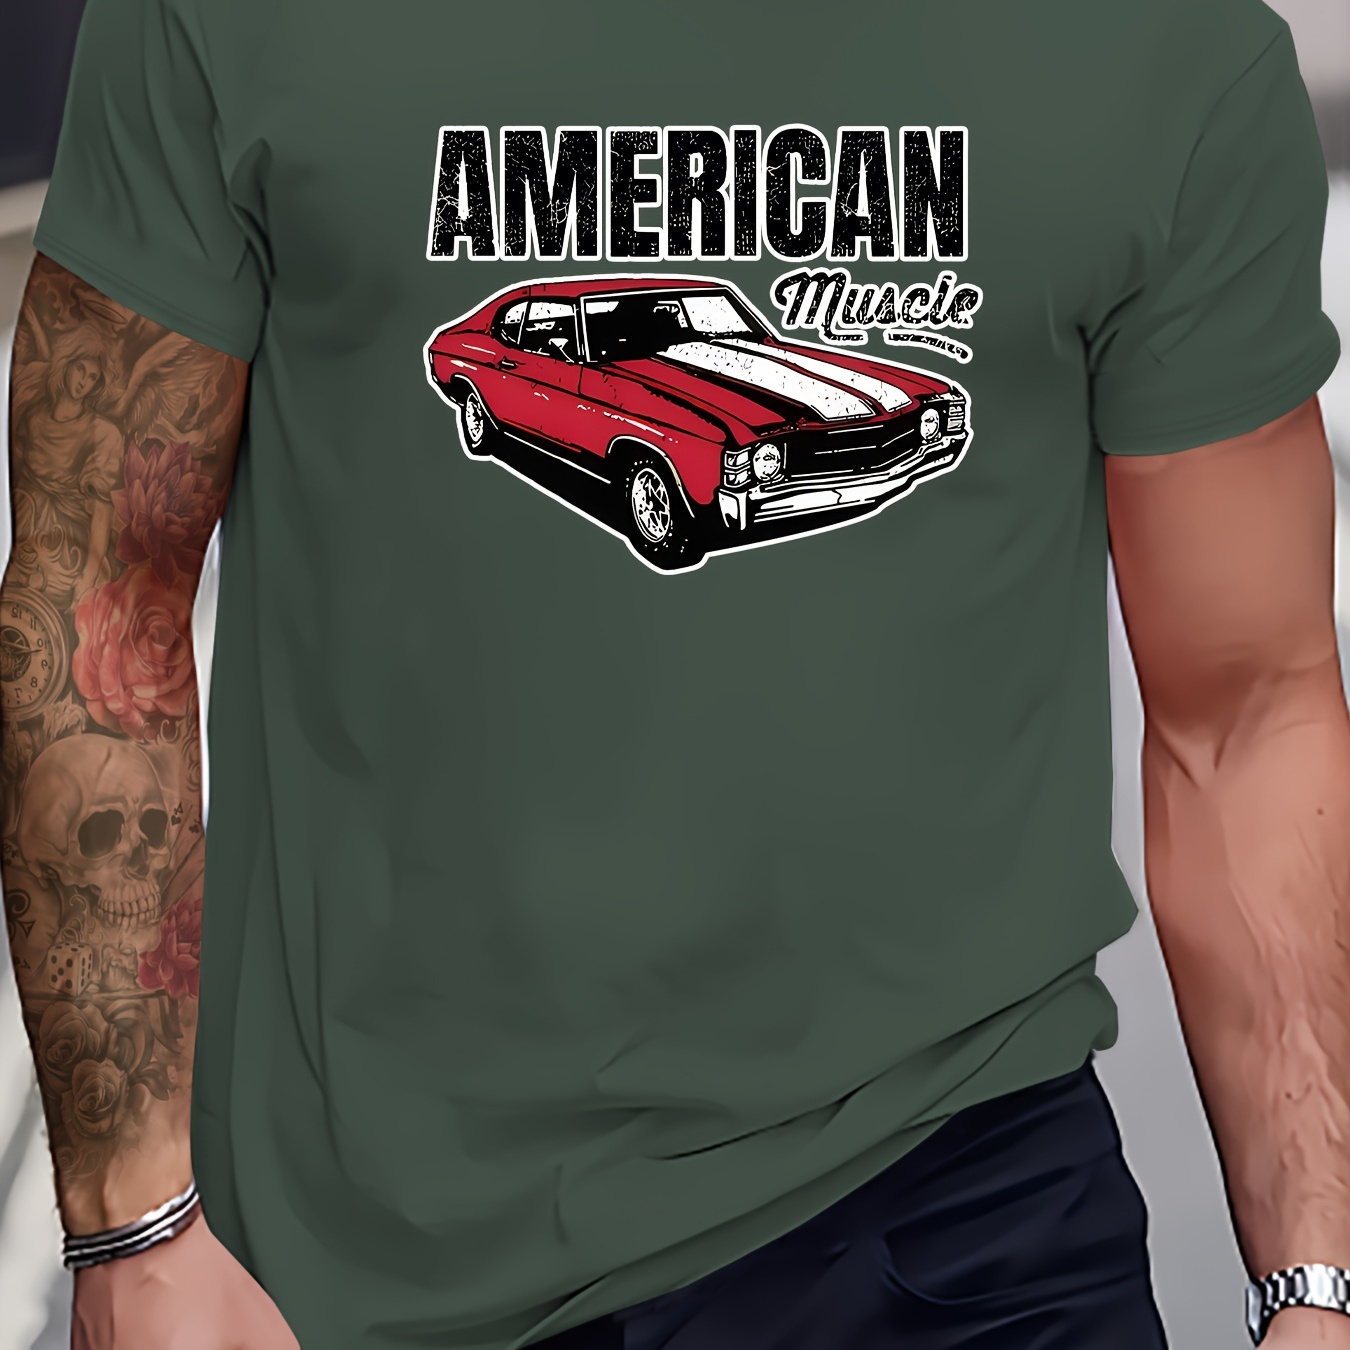 

American Muscle Print T Shirt, Tees For Men, Casual Short Sleeve T-shirt For Summer